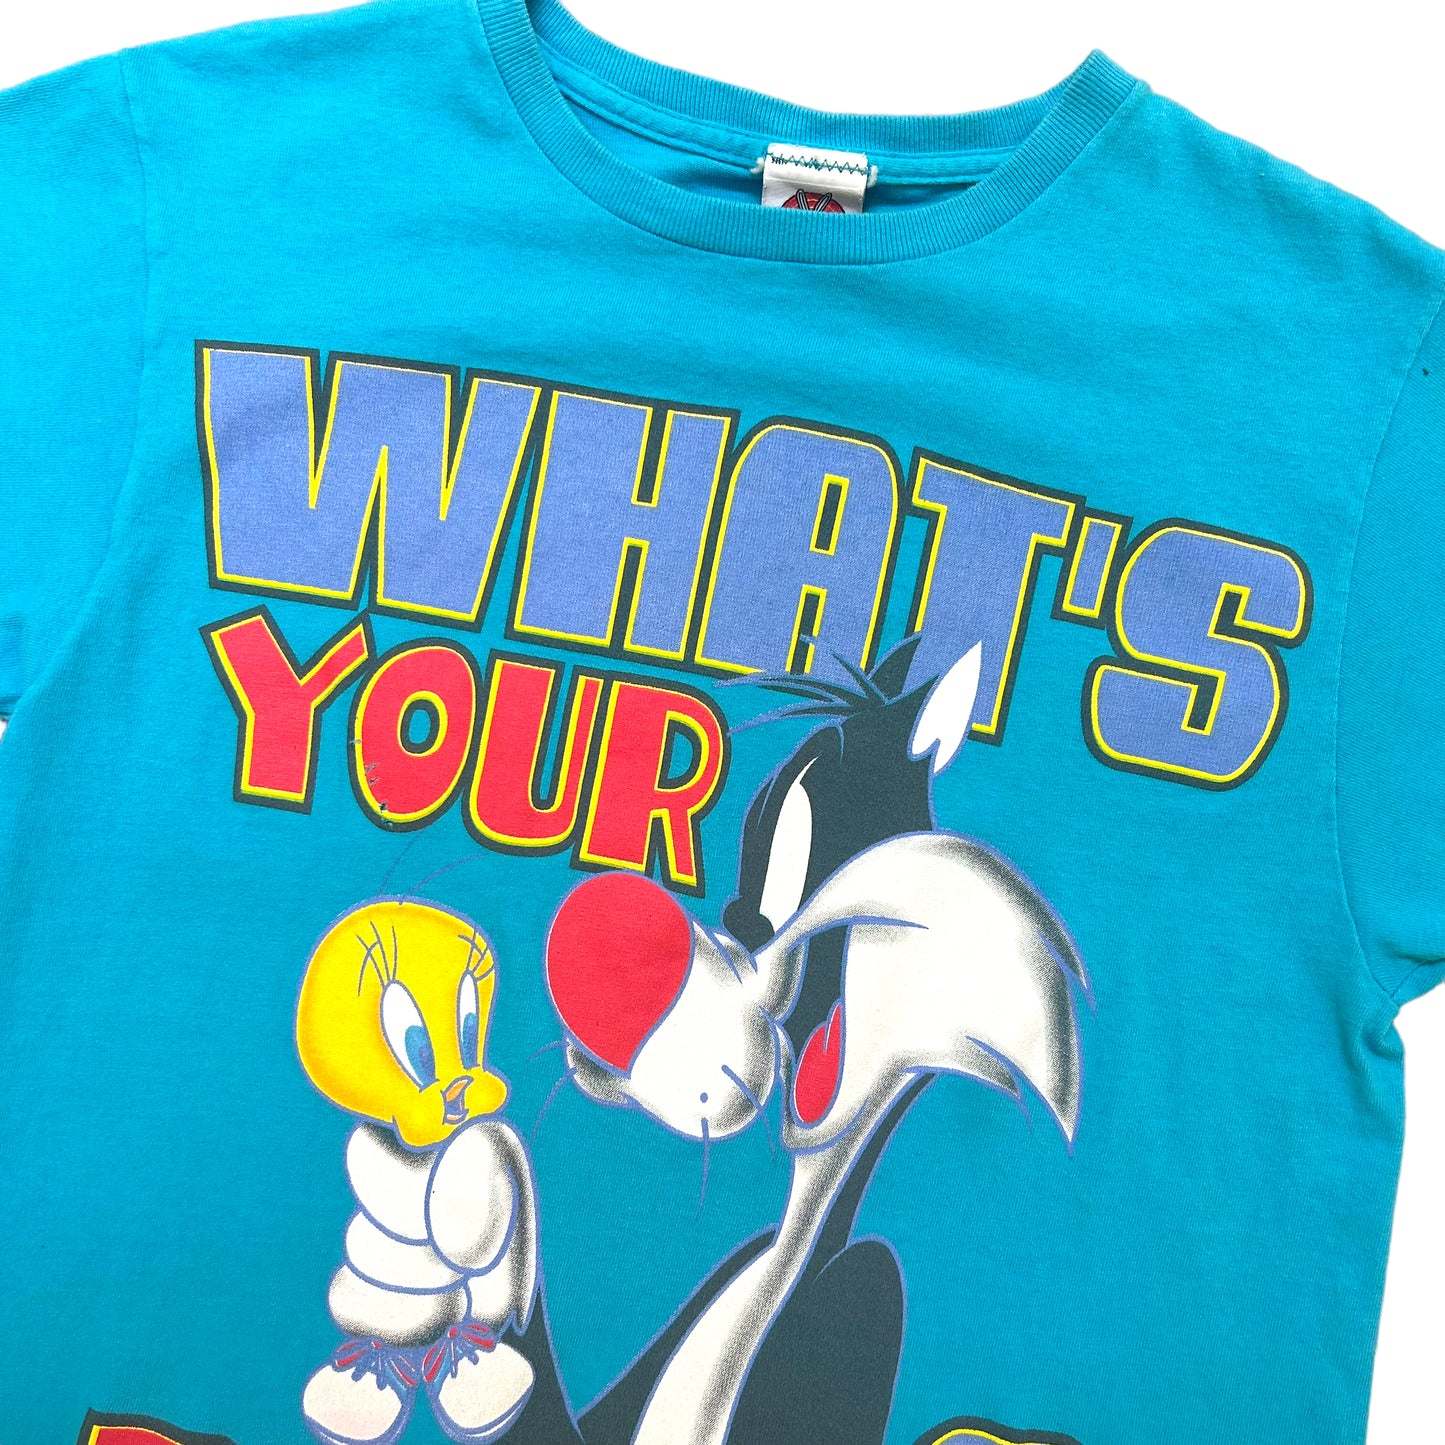 Vintage 1990s Sylvester “What’s Your Excuse?” Blue Looney Tunes Graphic T-Shirt - Size Small